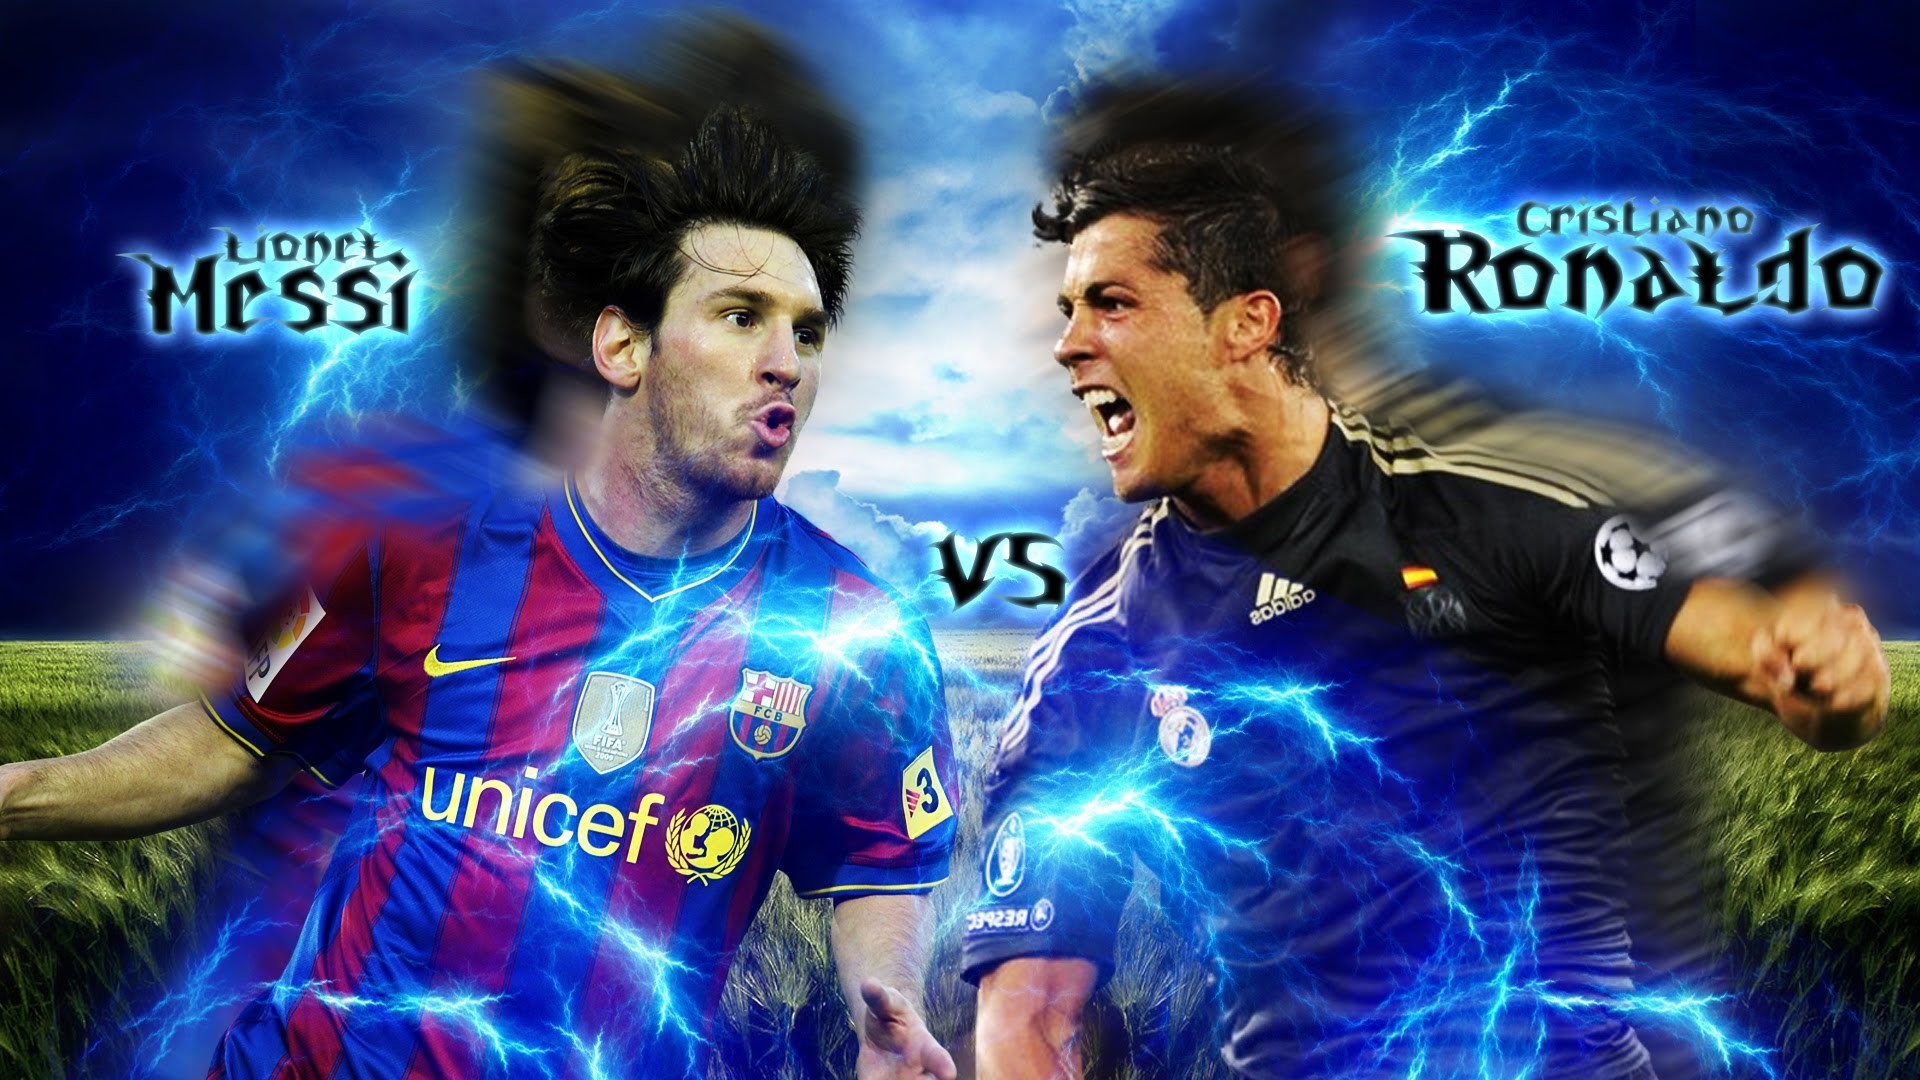 1920x1080 Awesome Messi Vs Ronaldo 2016 Wallpapers - HD Wallpapers